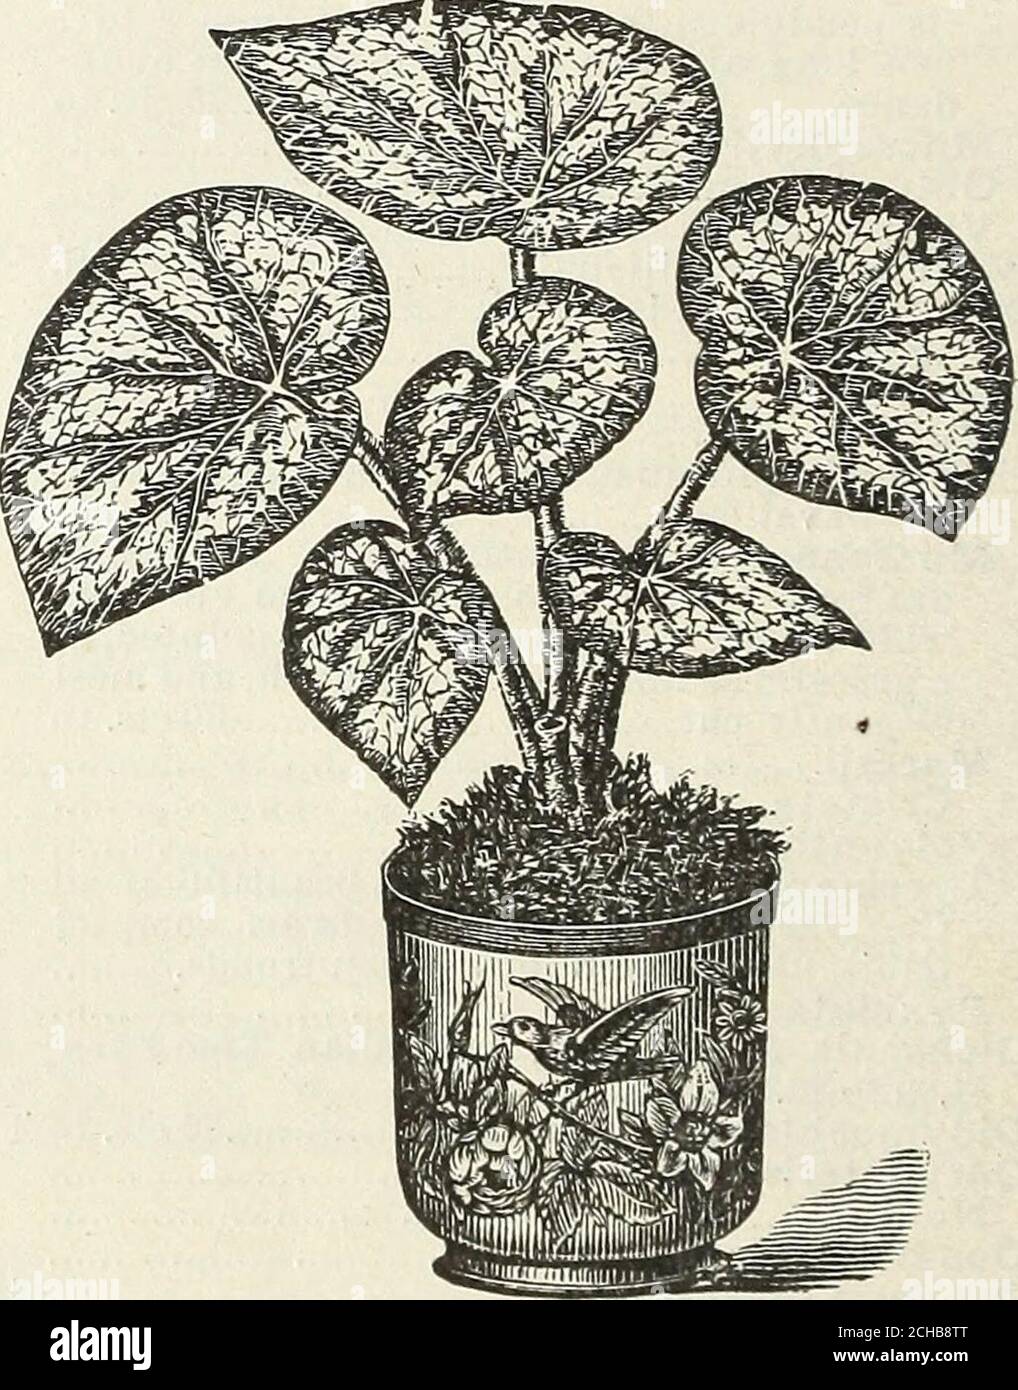 . John Saul's catalogue of plants for the spring of 1890 . spitosa Cylindraceus l 50 Sinuatus, free bloomer 50 Texensis, floweis yellow, fruit bright red 50 Wislizenii (Fish-hook Cactus) 1 00 Echinocereus Berlandieri, flowers purple, dwarf 50 Ccespitosus, flowers crimson-purple pectinatus, free bloomer pancupina procumbens, purple flowerspolycephalus Mamillaria Grahami. 50 50 cts. to 1 00 BEGONIAS. Varieties of dwarf growth, cultivated chieflyfor their beautiful foliage. Principally of theEex type. Begonia, W. E. Gumbleton, a beautiful hybridbetween Rex and Discolor. 25 cents. Bettine Rothschi Stock Photo